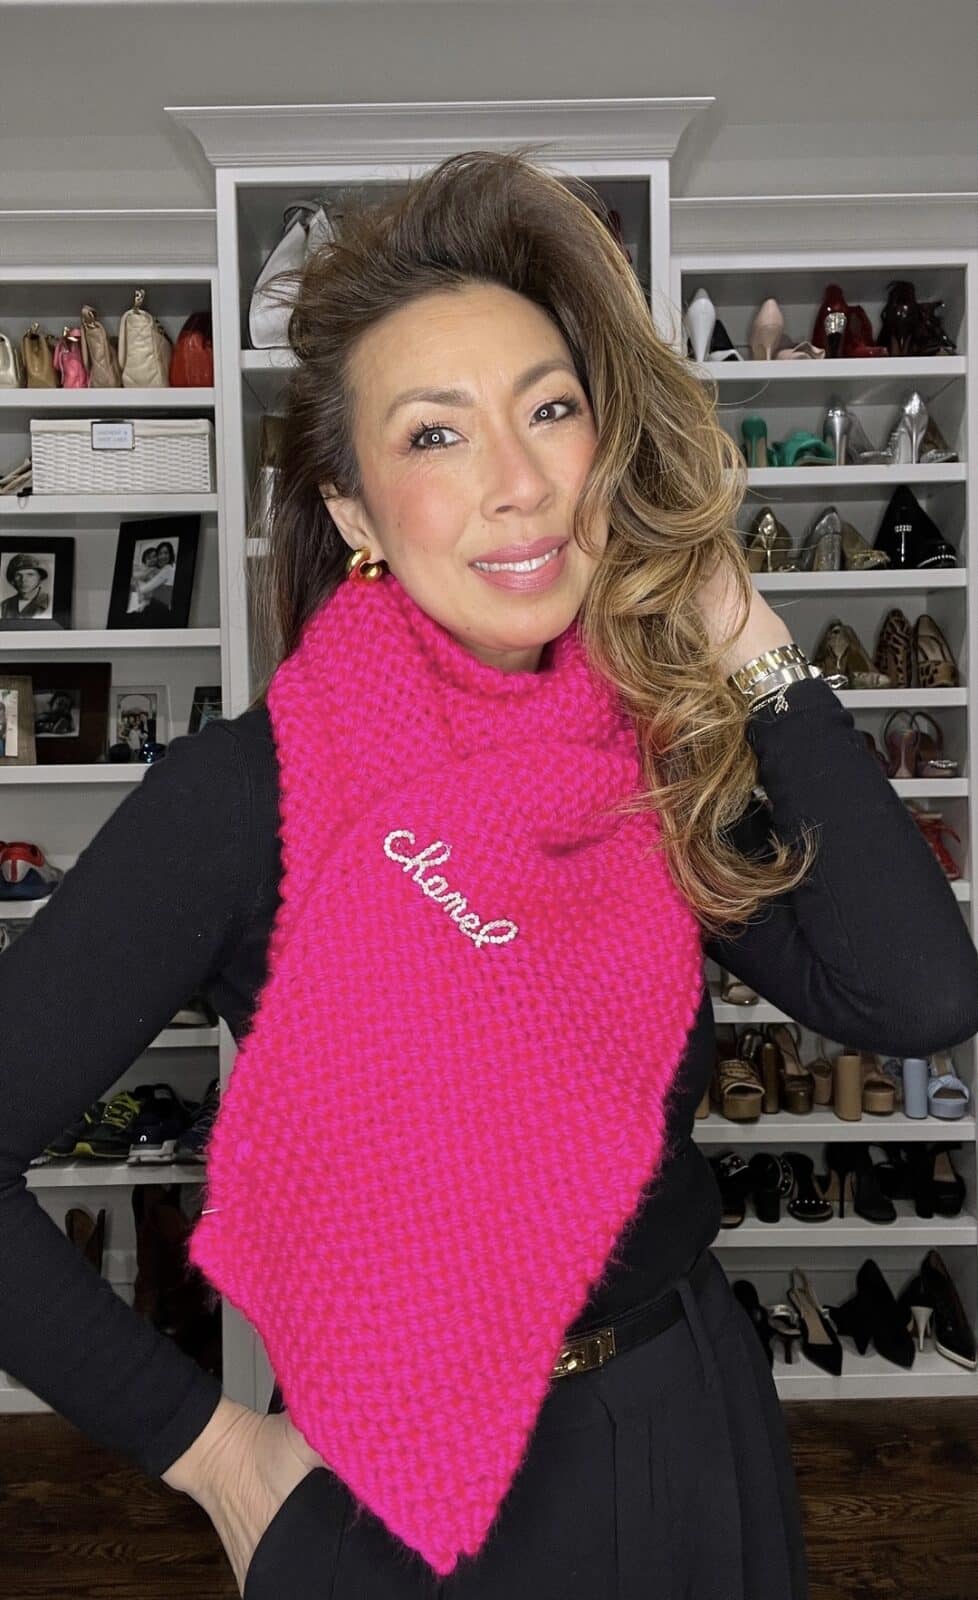 style of sam wearing chanel hair clip as a brooch on pink scarf, how to wear a hair clip as a brooch